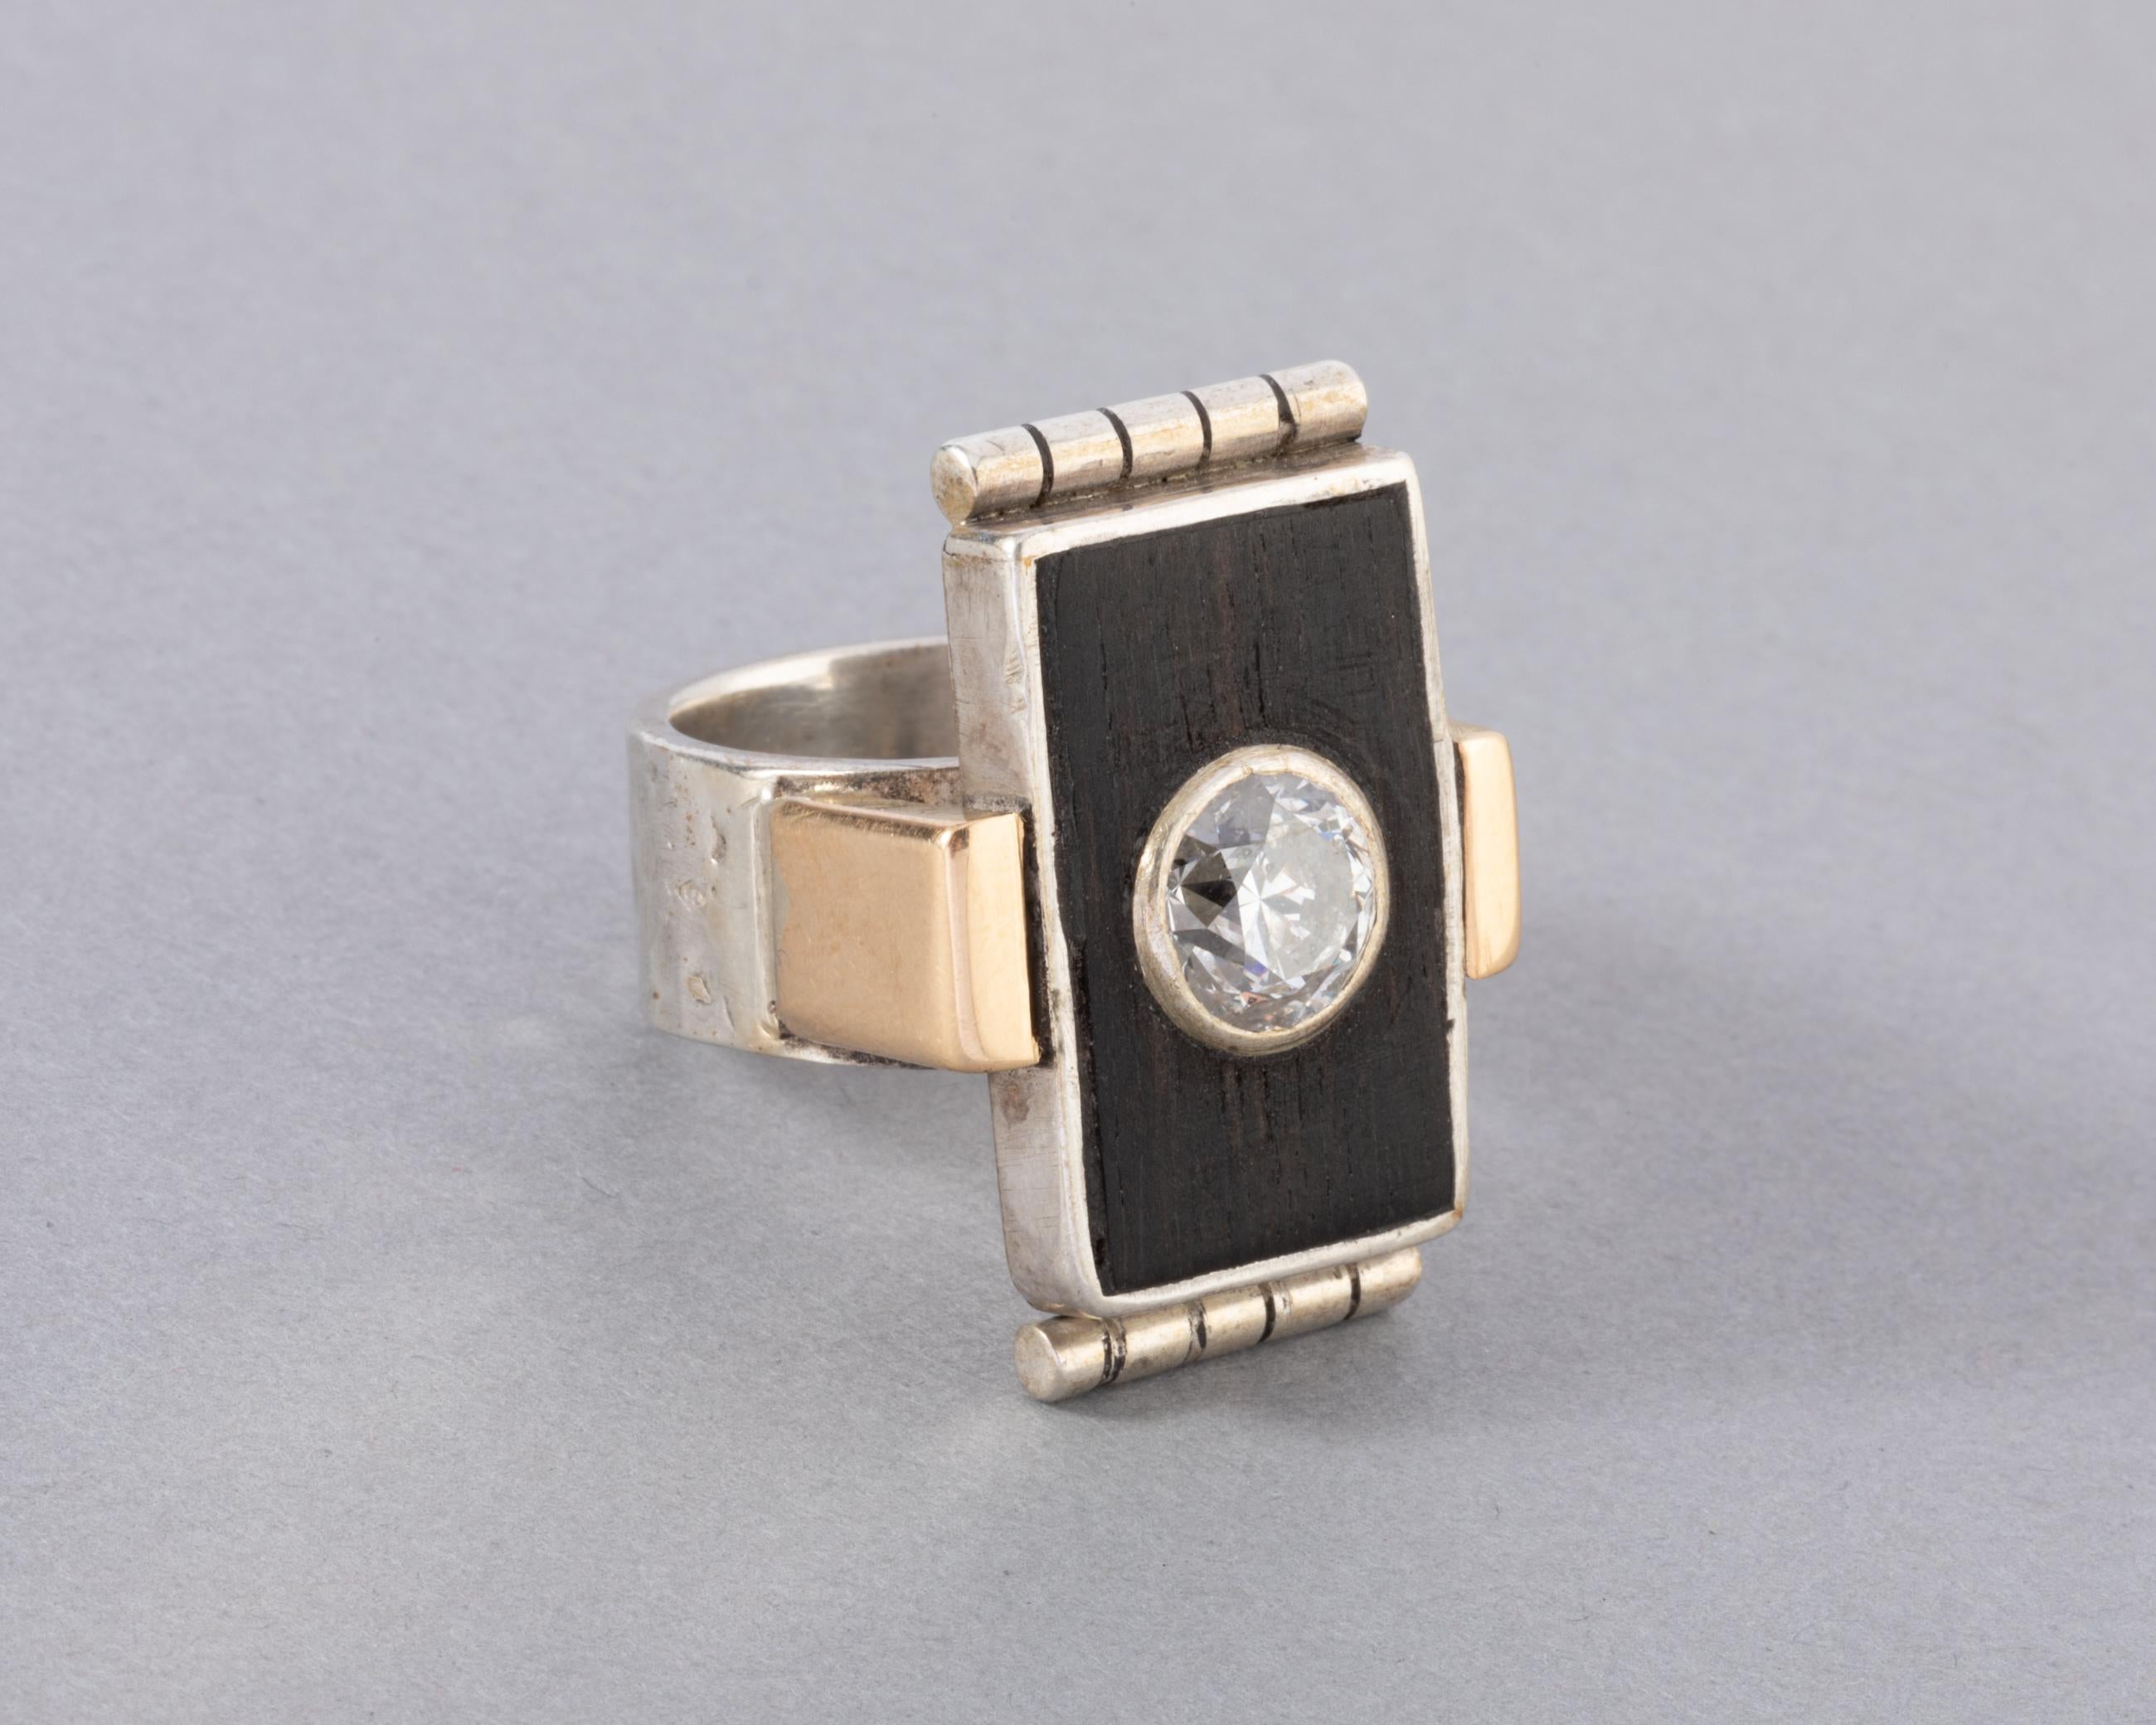 One rare and beautiful ring made by great French Creator Jean Desprès.
Made in France circa 1930.
Made in silver, gold 18k, ebony wood and set with a 1.80 carats diamond. The diamond is L SI2 approximately.
Dimension: 28*20 mm for the front. 27 mm